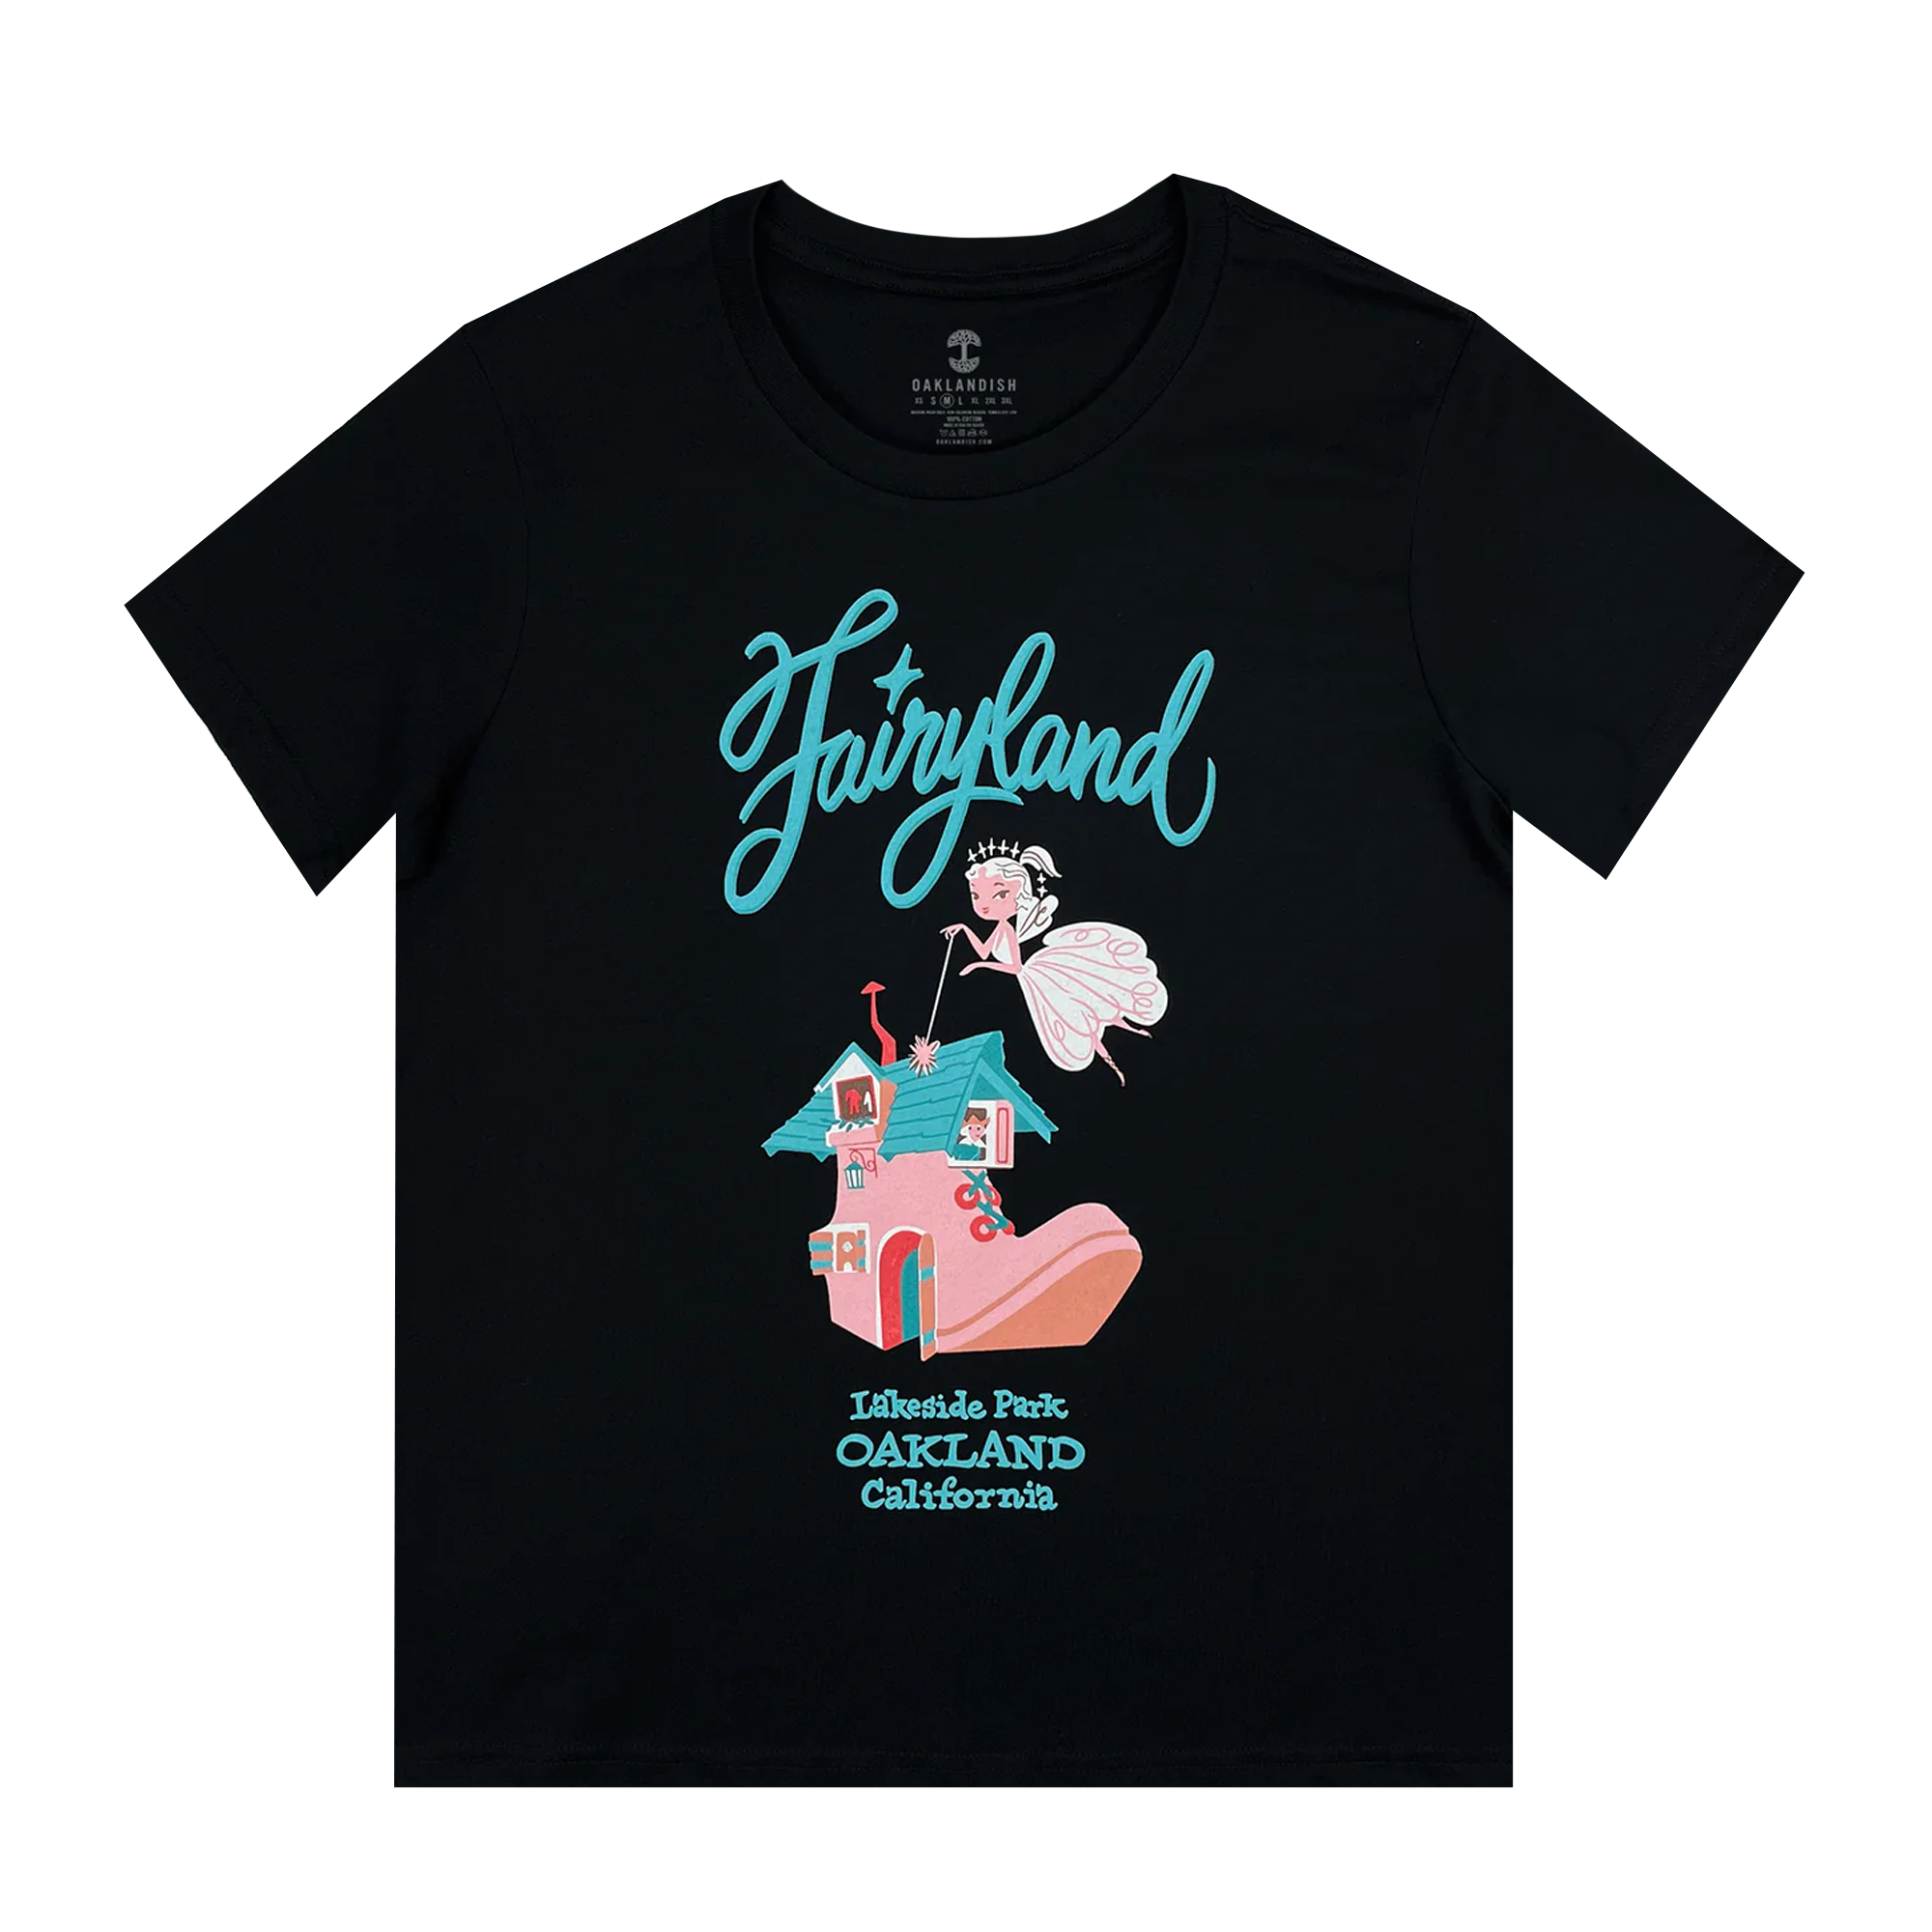 Black women’s cut t-shirt with retro style blue and pink Oakland Fairyland graphic on the front center chest.